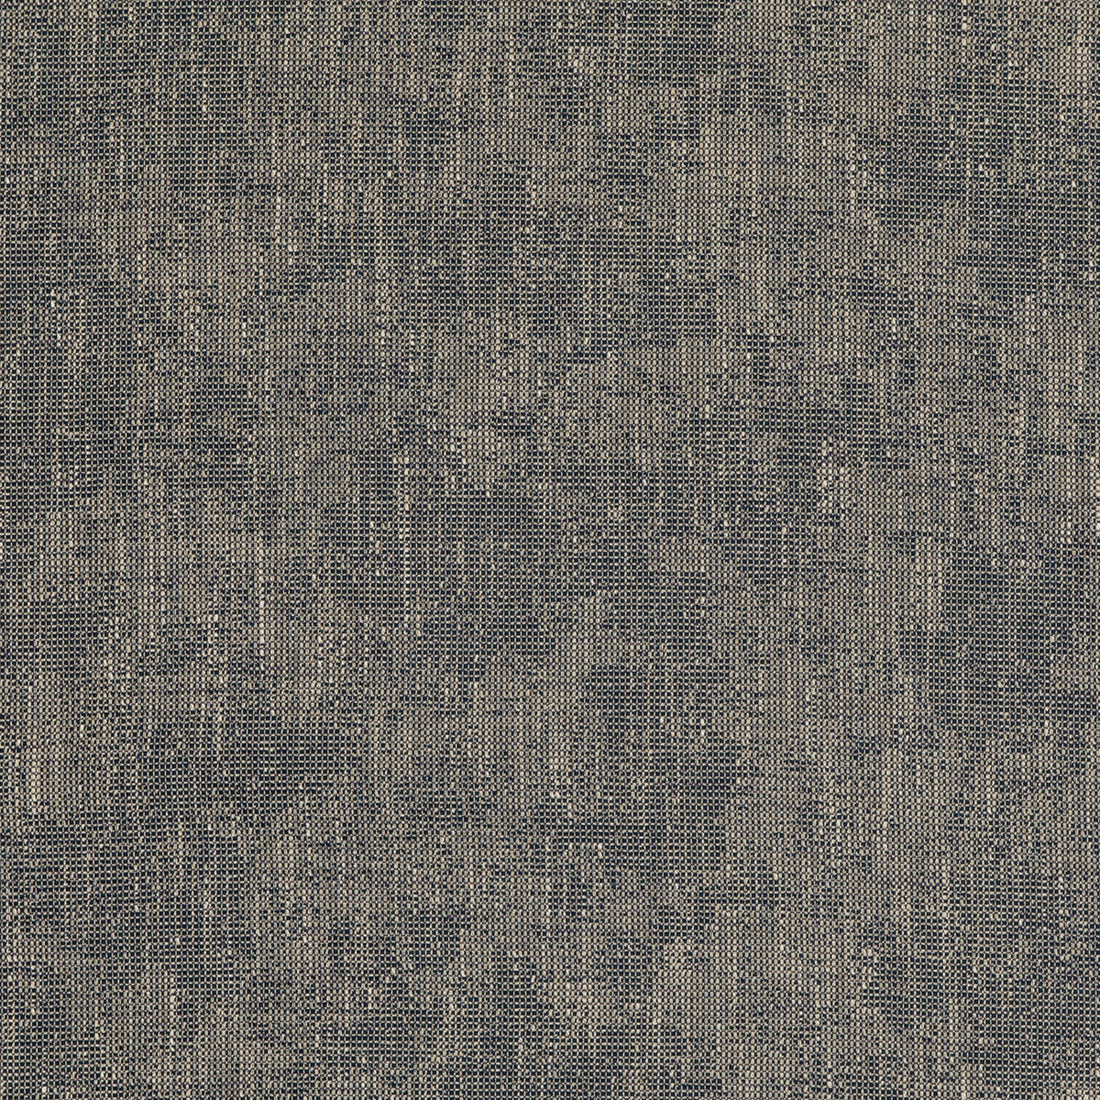 Bower fabric in indigo color - pattern PF50489.680.0 - by Baker Lifestyle in the Block Weaves collection